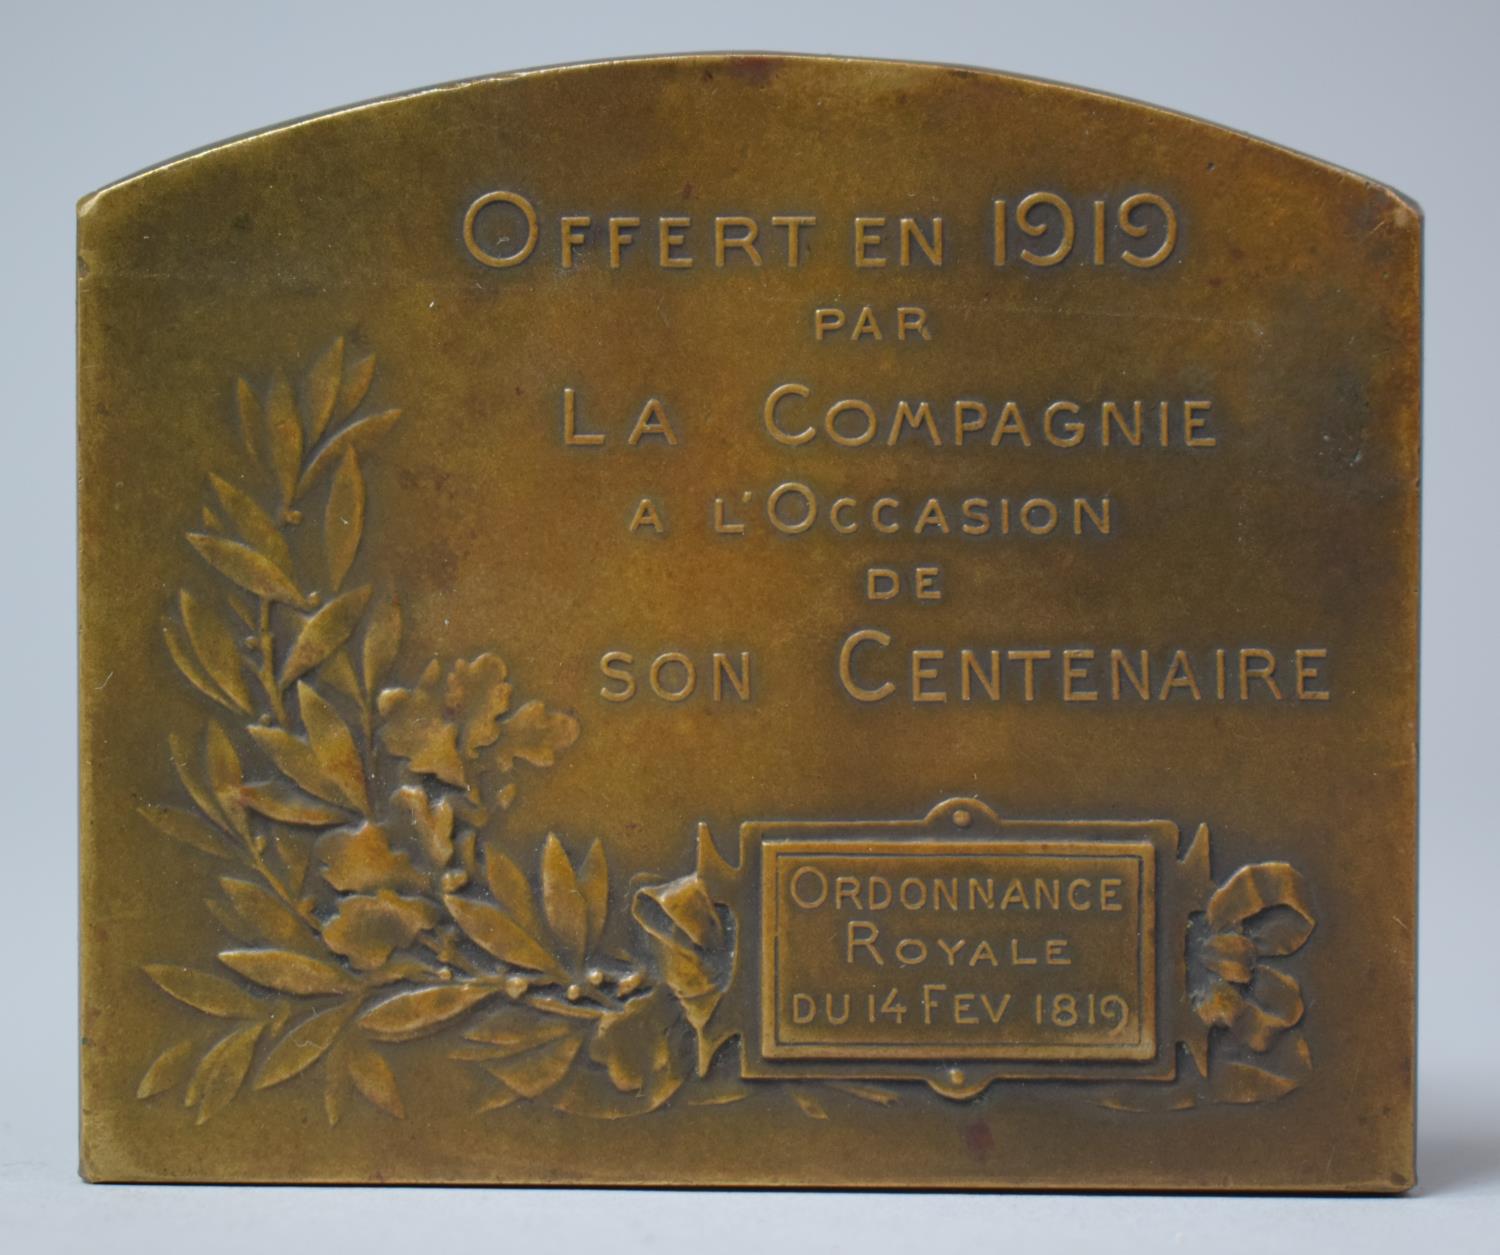 A French Bronze Plaque Commemorating the Centenary of French Insurer Ordornnance Royale Founded 14th